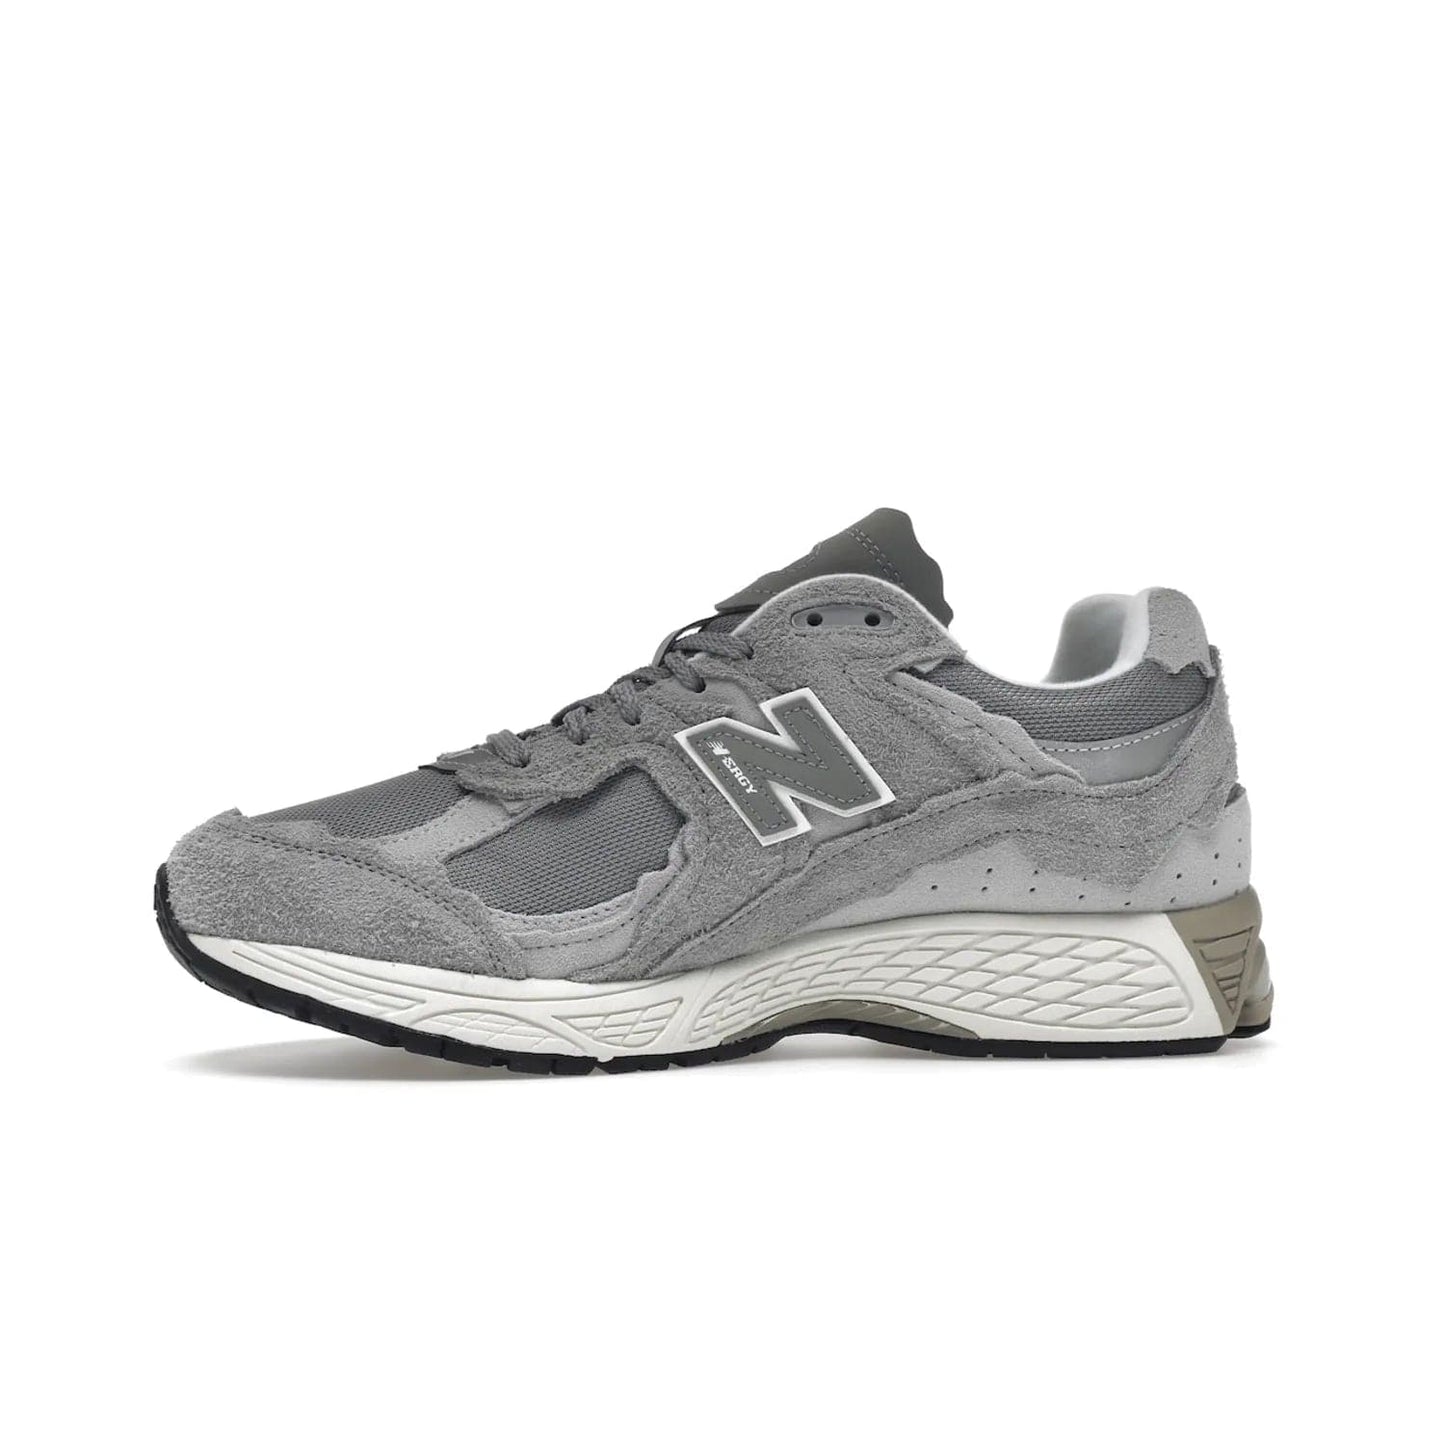 New Balance 2002R Protection Pack Grey - Image 18 - Only at www.BallersClubKickz.com - The New Balance 2002R Protection Pack Grey provides superior protection and all-day comfort. It features a blend of synthetic and mesh materials, foam midsole, rubber outsole, and a toe cap and heel counter. Show off the classic "N" logo and "2002R" lettering. Get a pair on February 14, 2023 for protection and style.